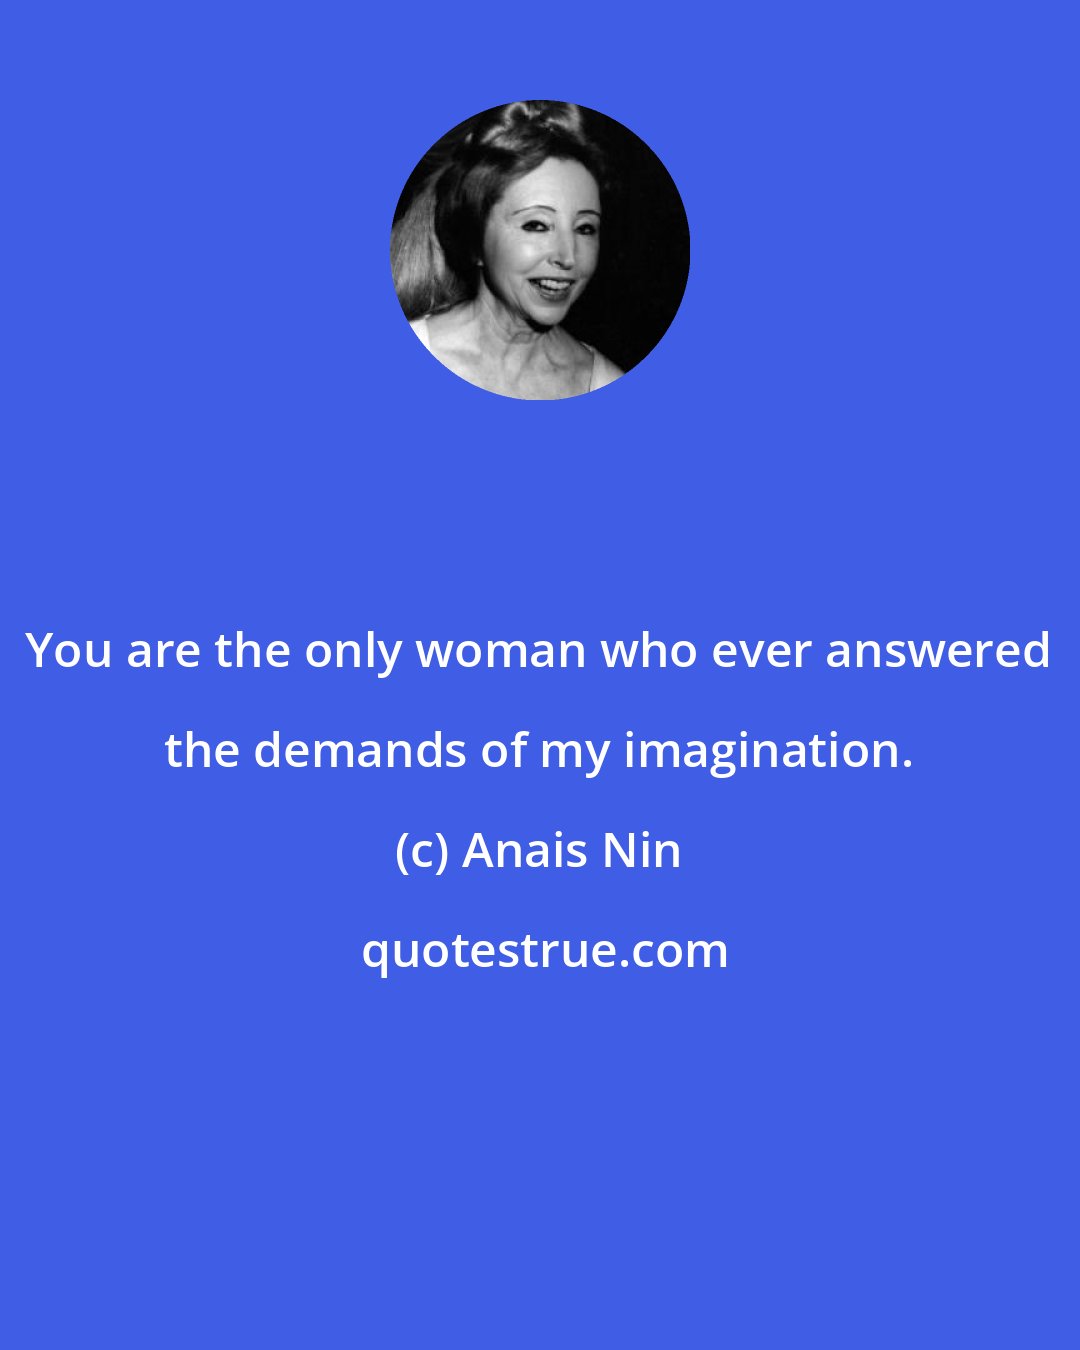 Anais Nin: You are the only woman who ever answered the demands of my imagination.